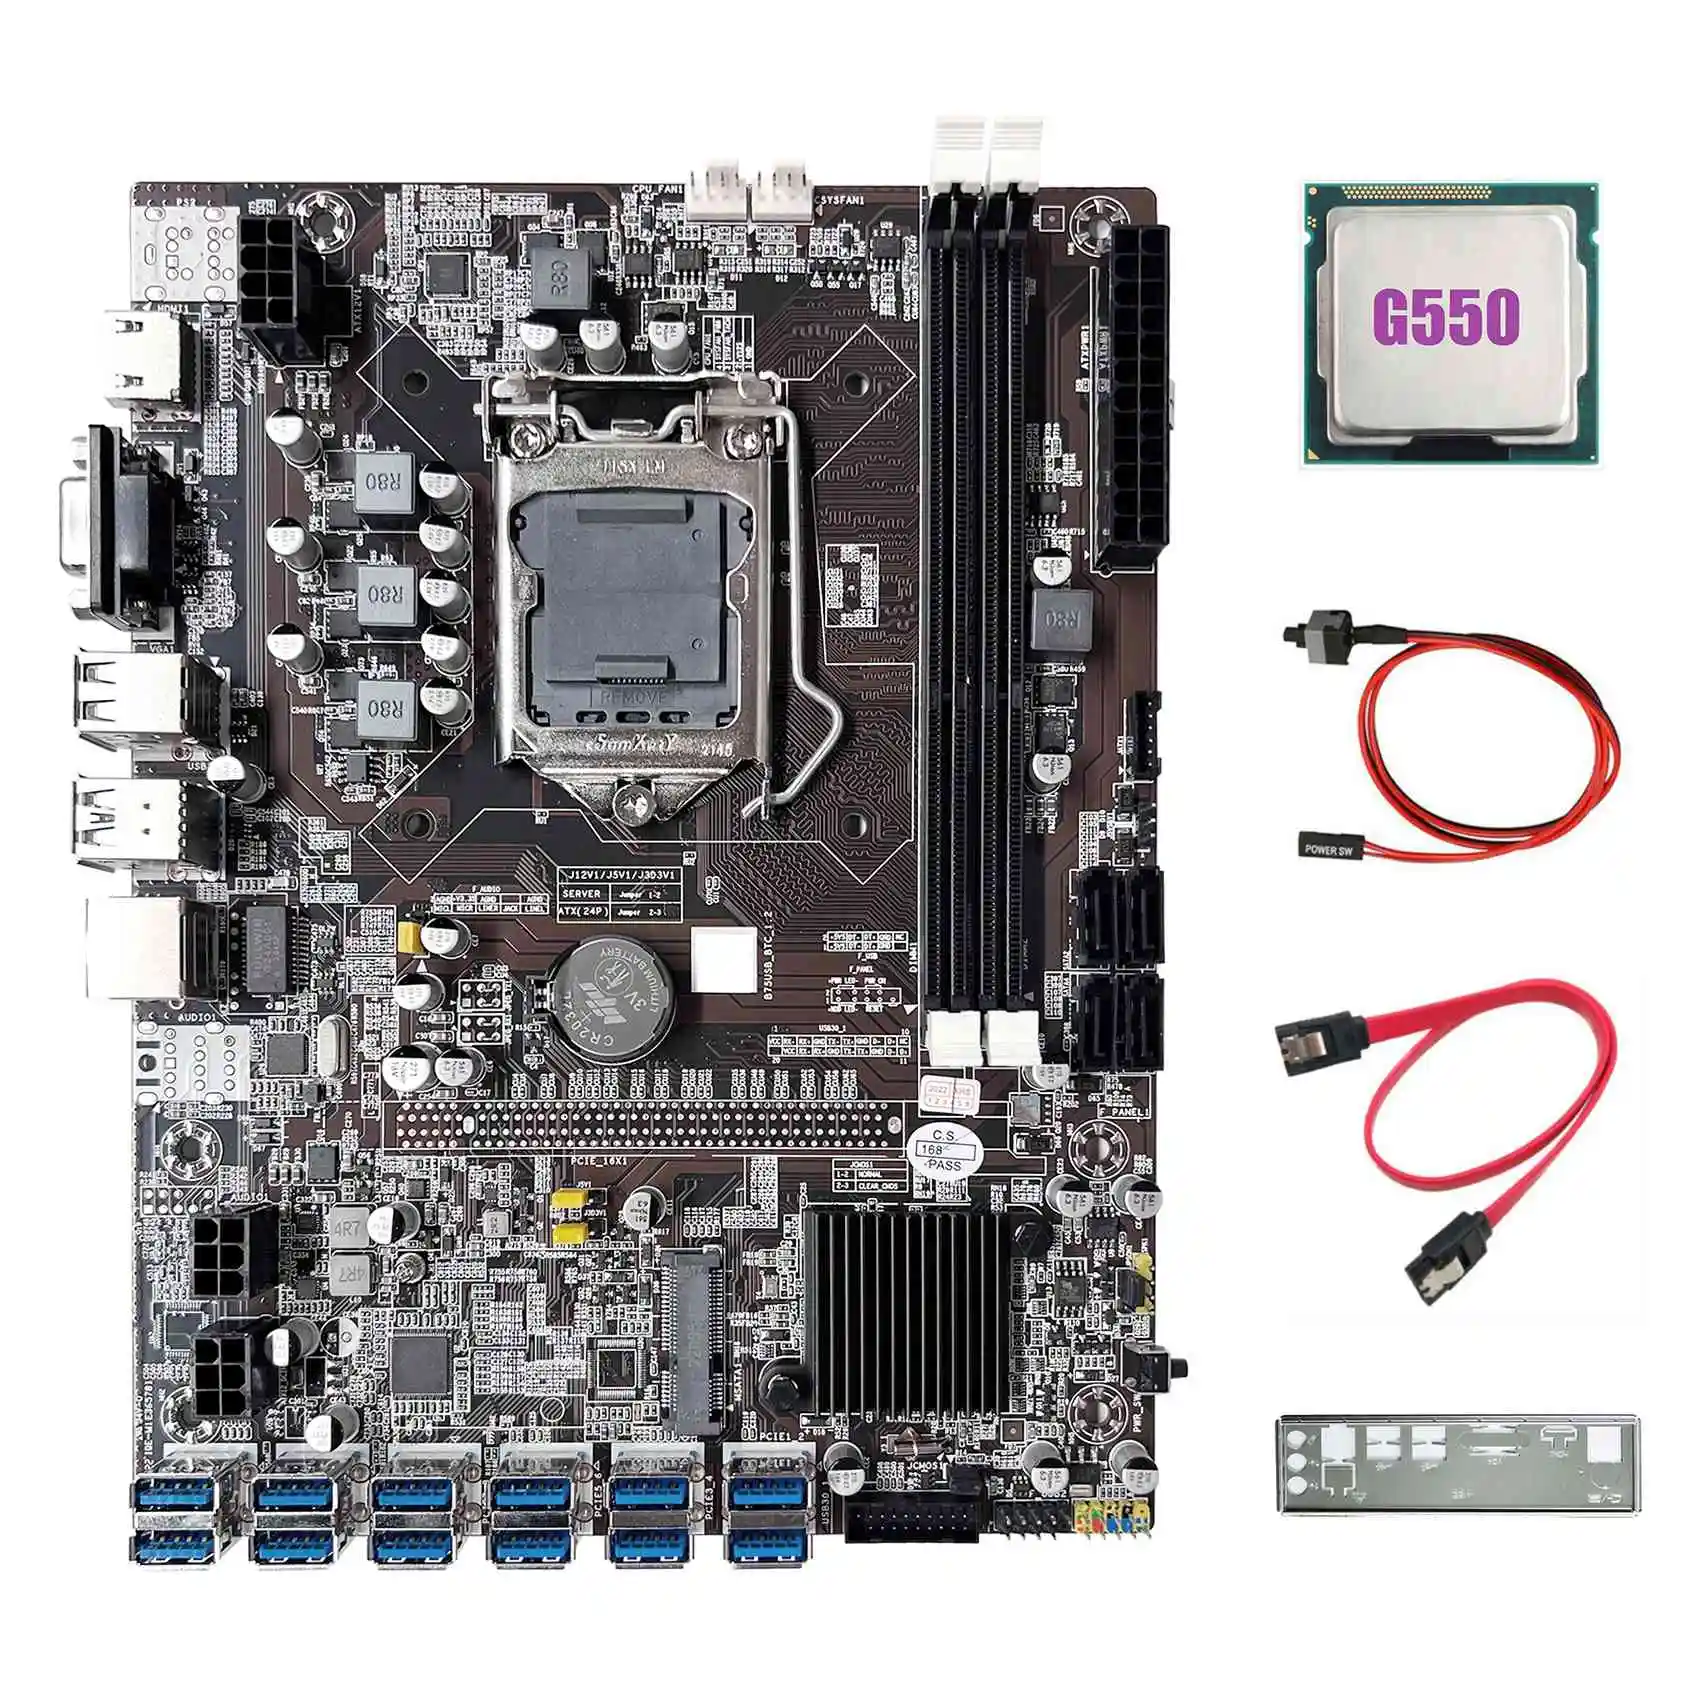 

B75 12USB BTC Mining Motherboard+G550 CPU+SATA Cable+Switch Cable+Baffle 12XUSB3.0 B75 ETH Miner Motherboard